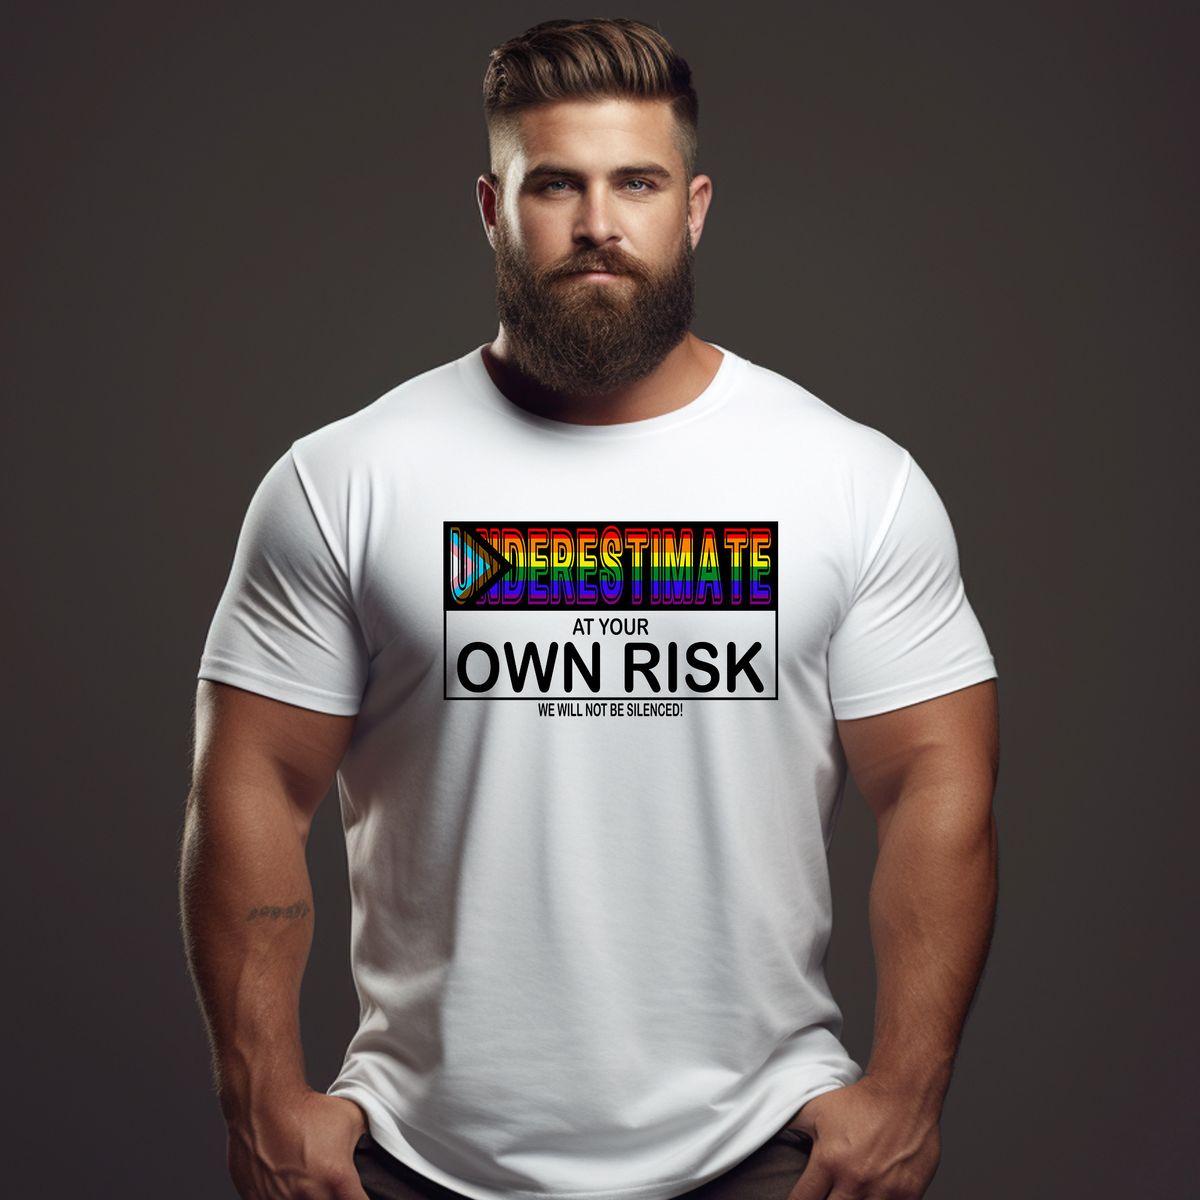 Underestimate at Your Own Risk Tee